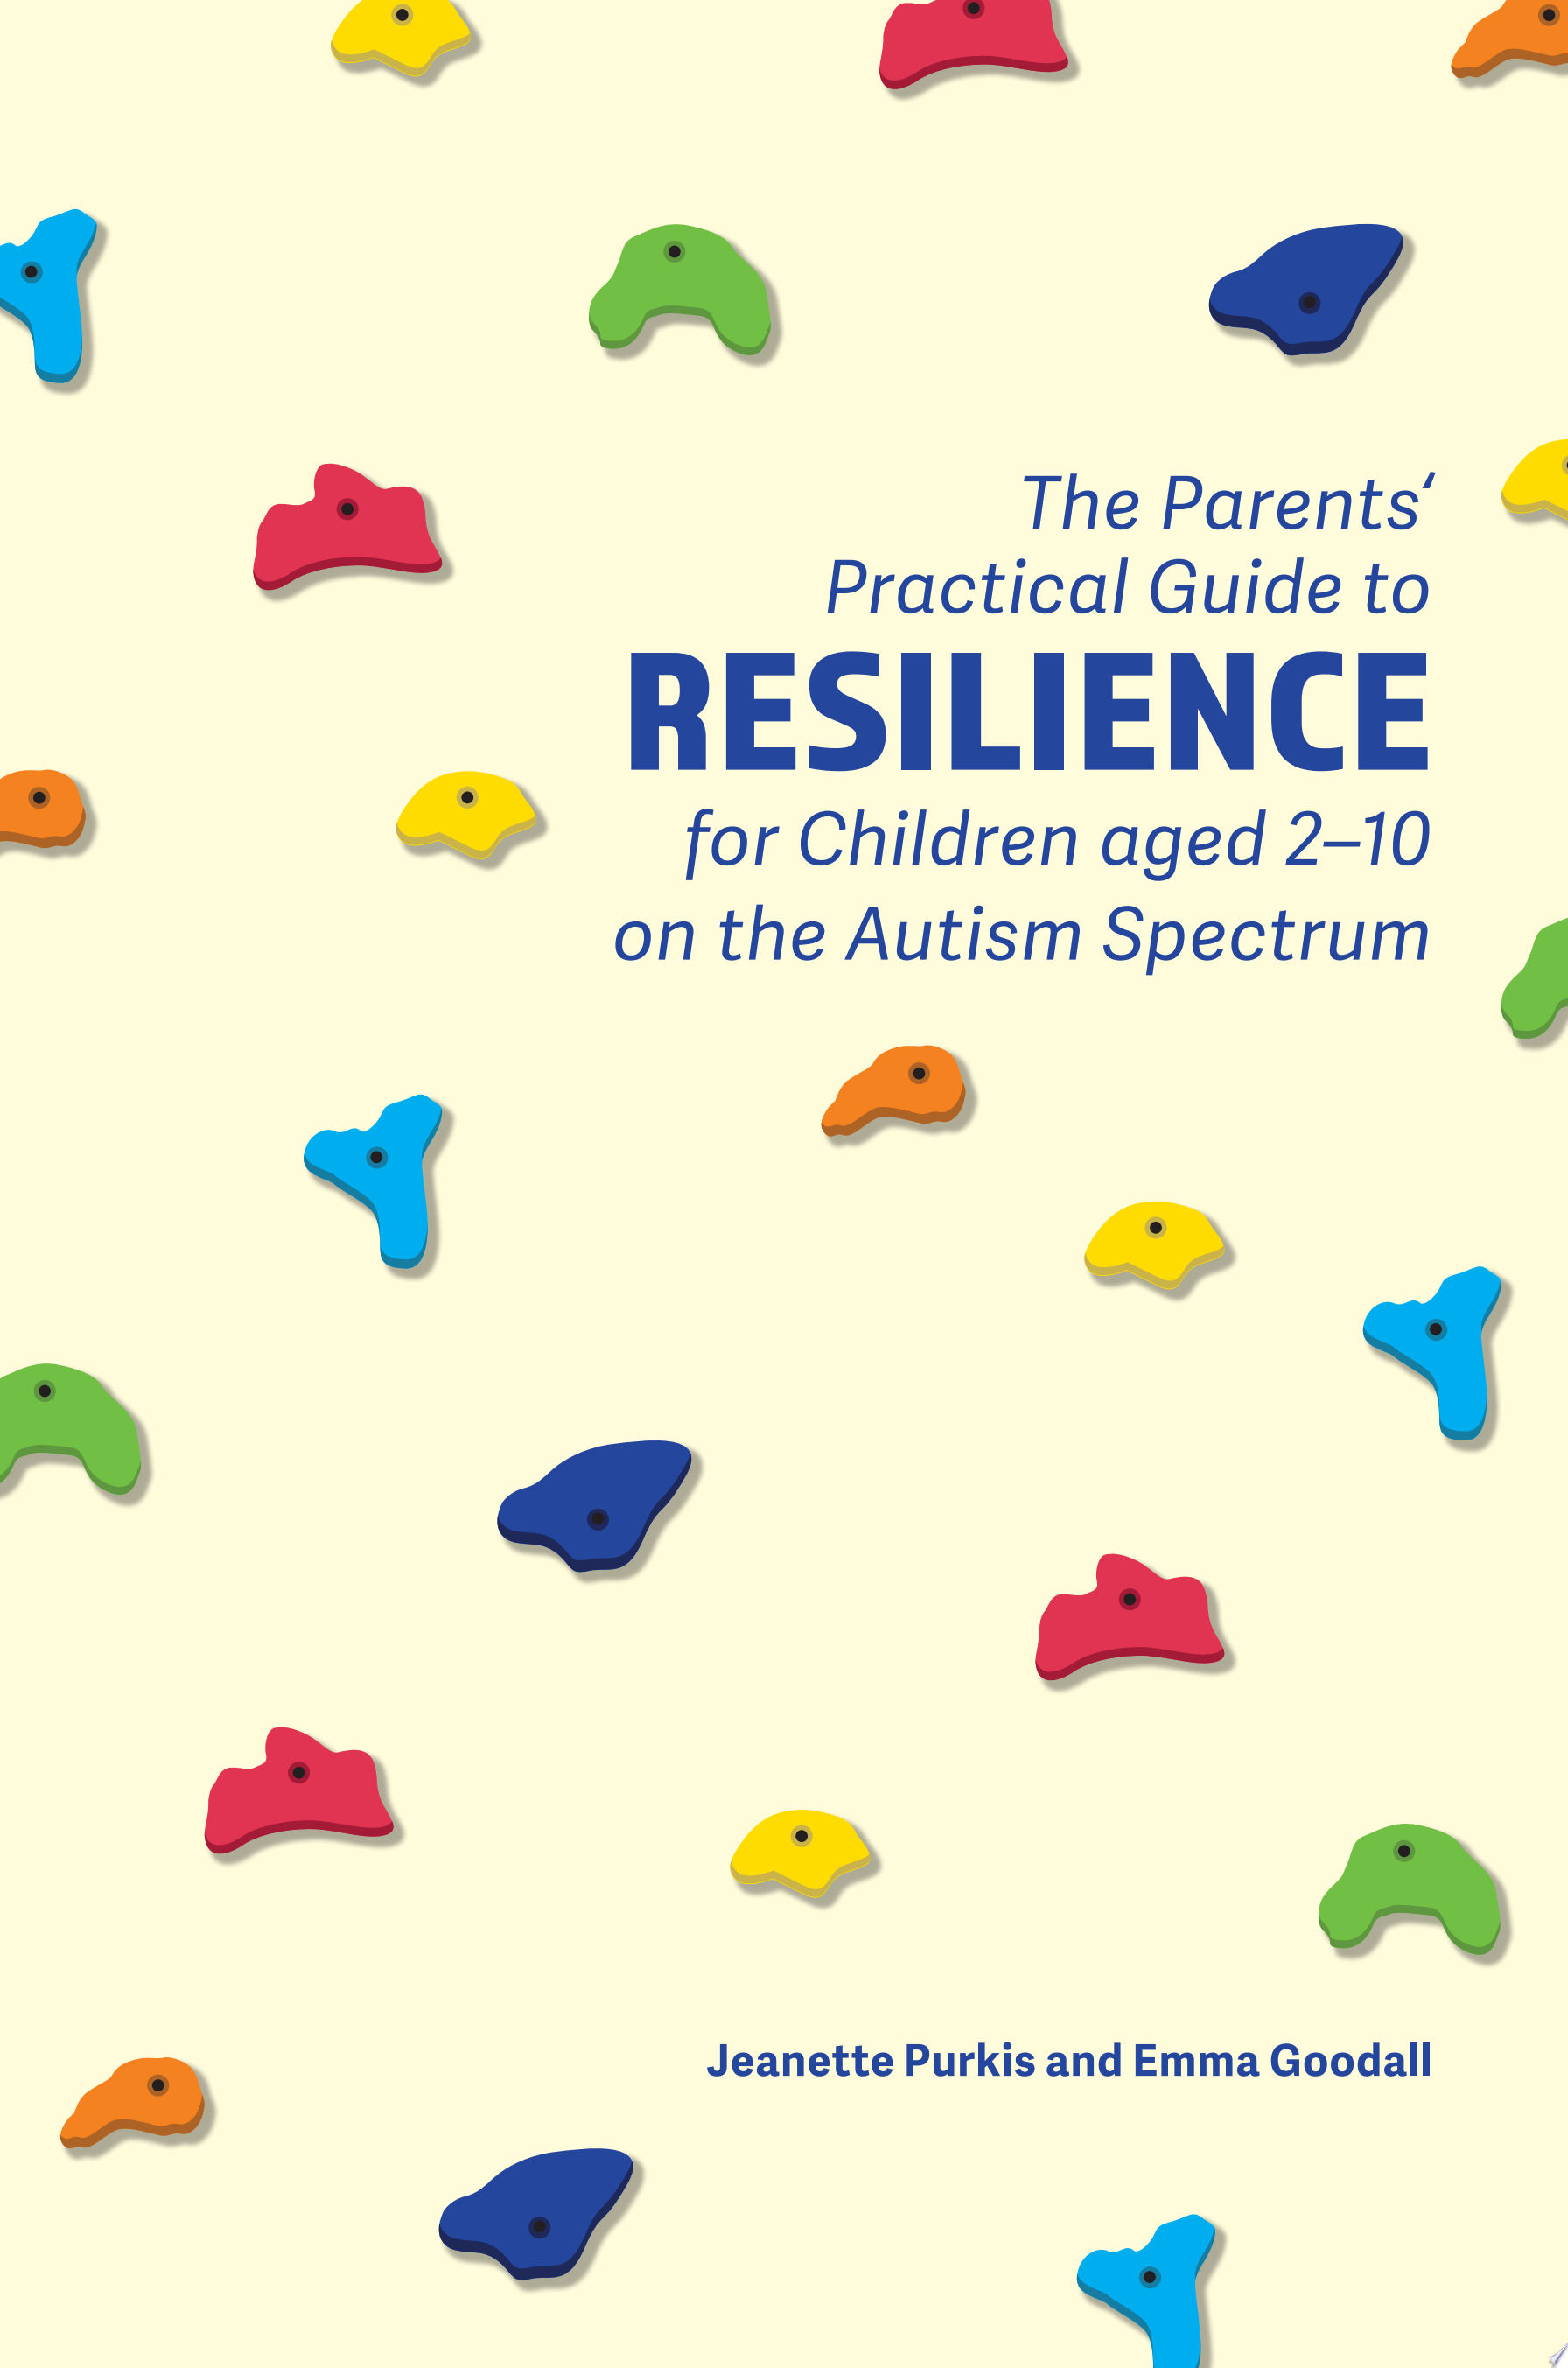 Image for "The Parents&#039; Practical Guide to Resilience for Children aged 2-10 on the Autism Spectrum"